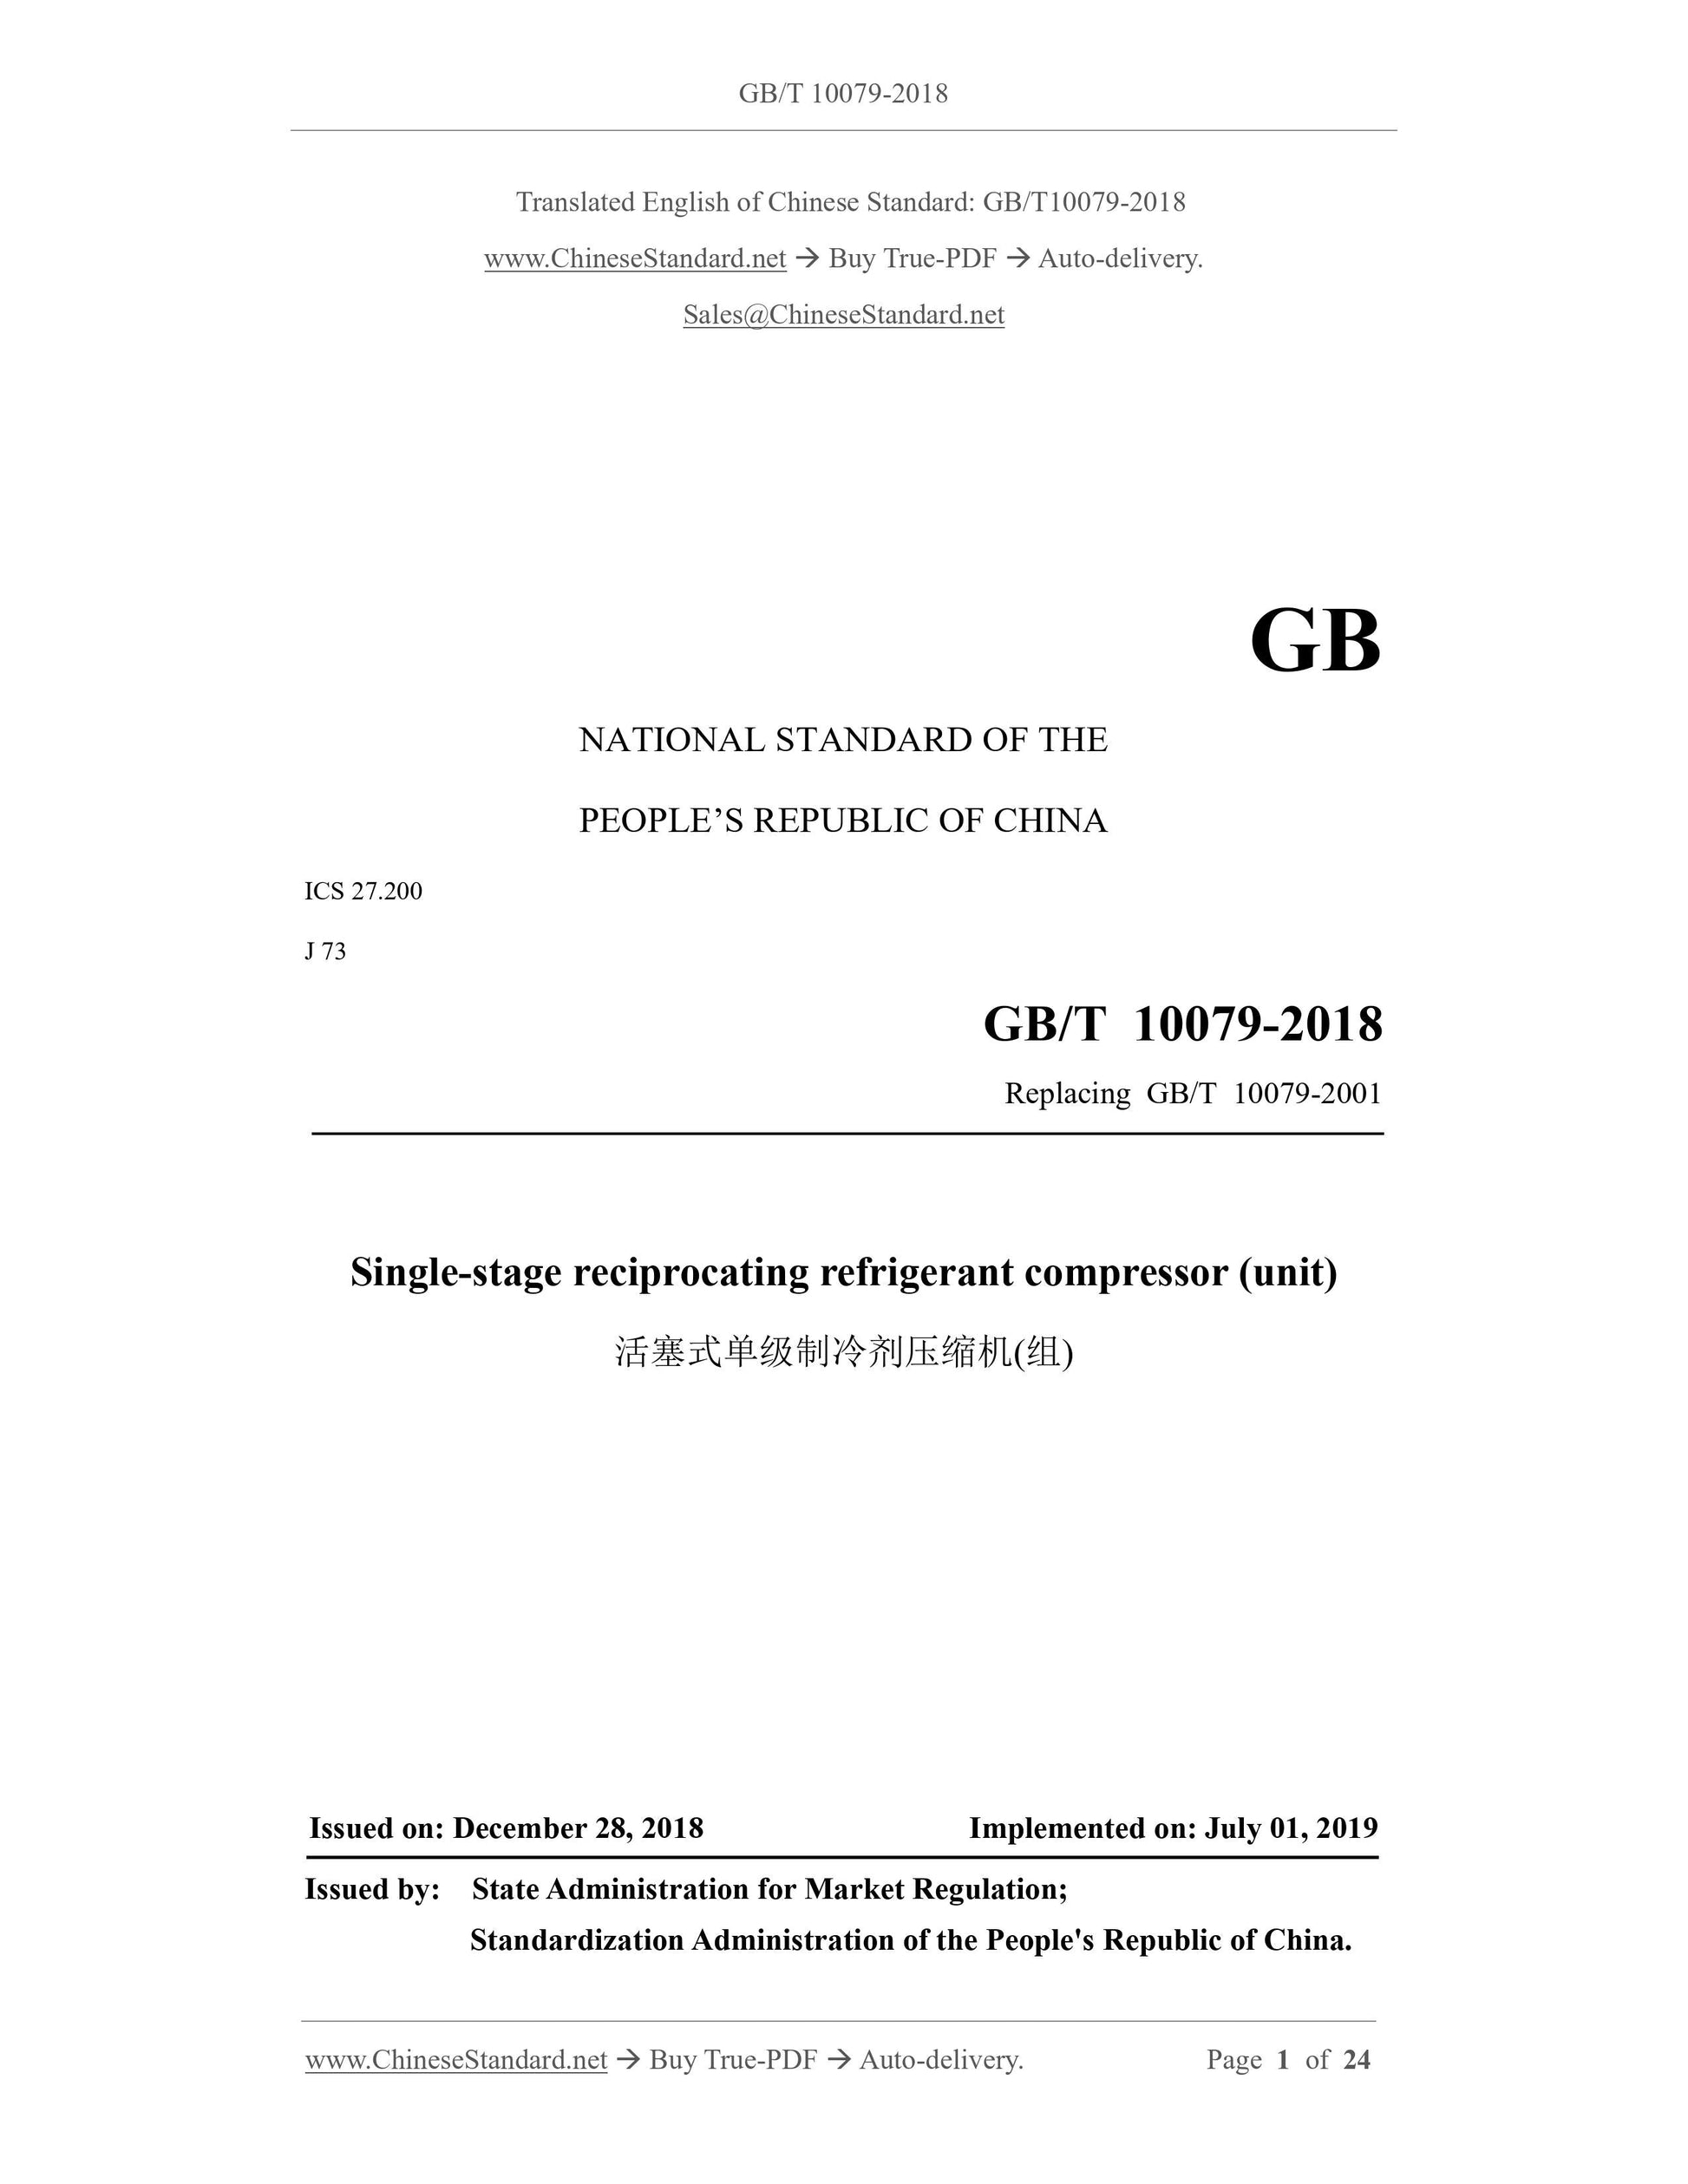 GB/T 10079-2018 Page 1